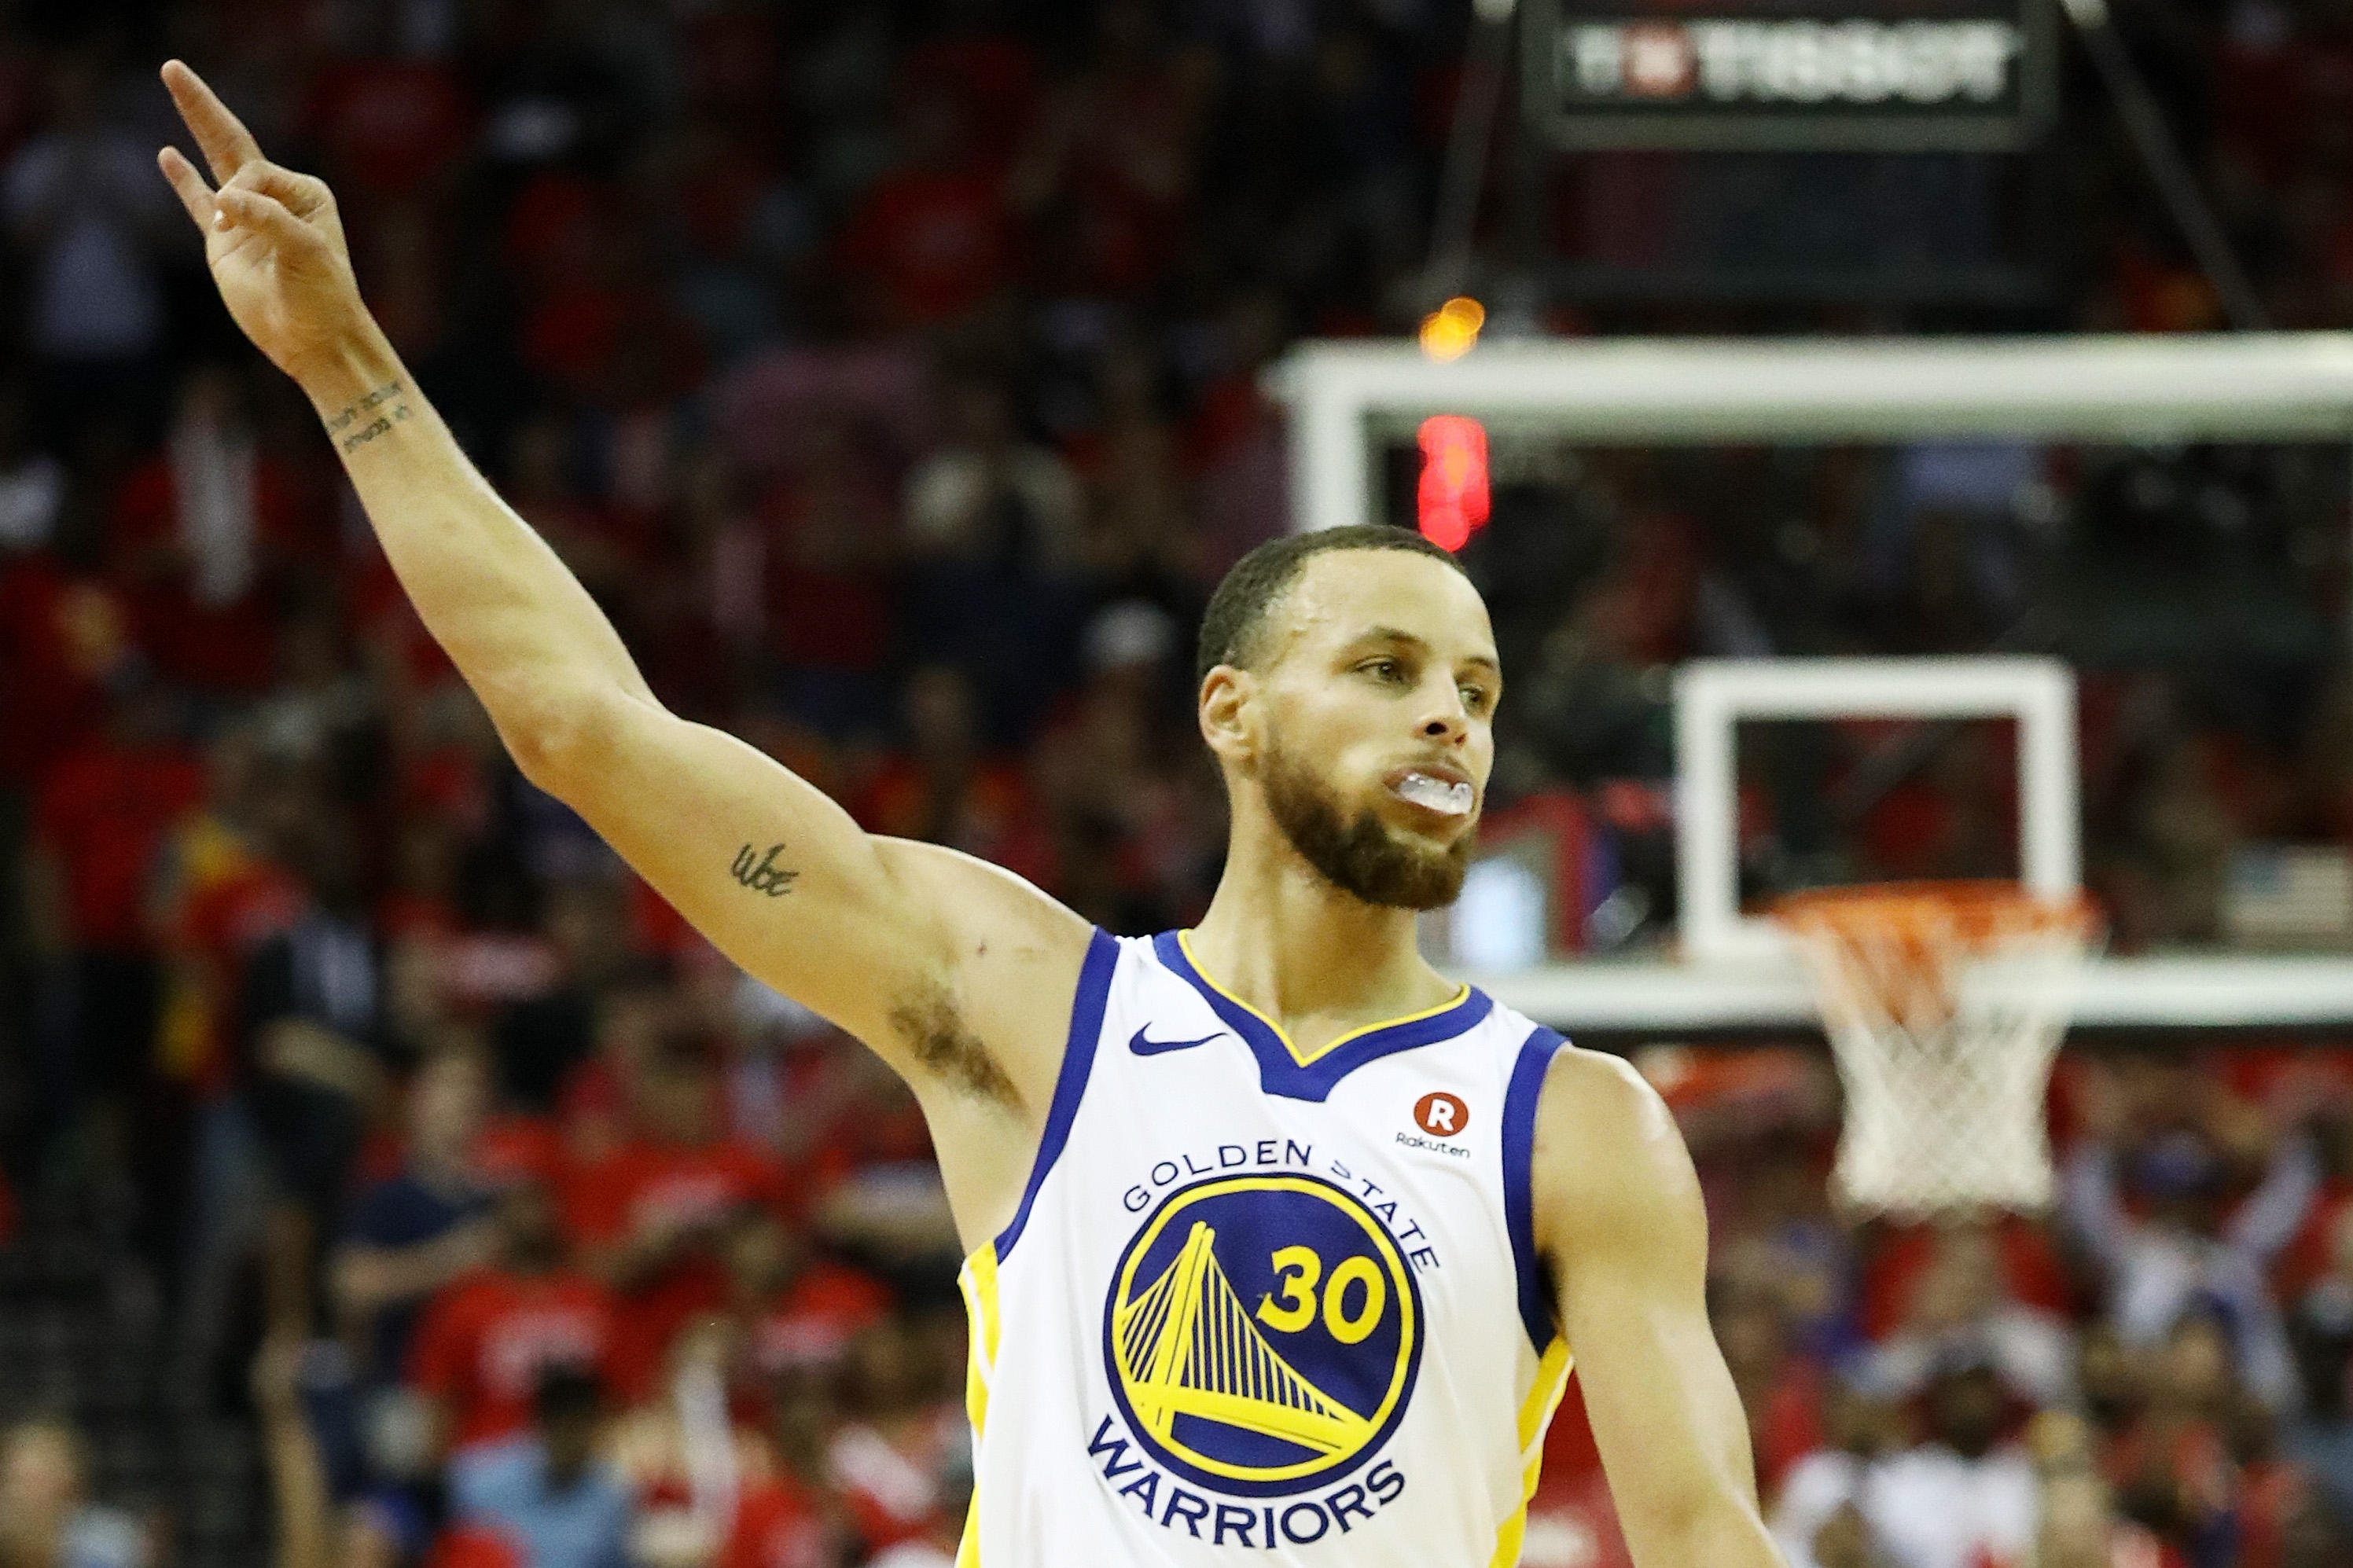 Golden State Warriors F Andre Iguodala to play in Game 3 of 2018 NBA Finals